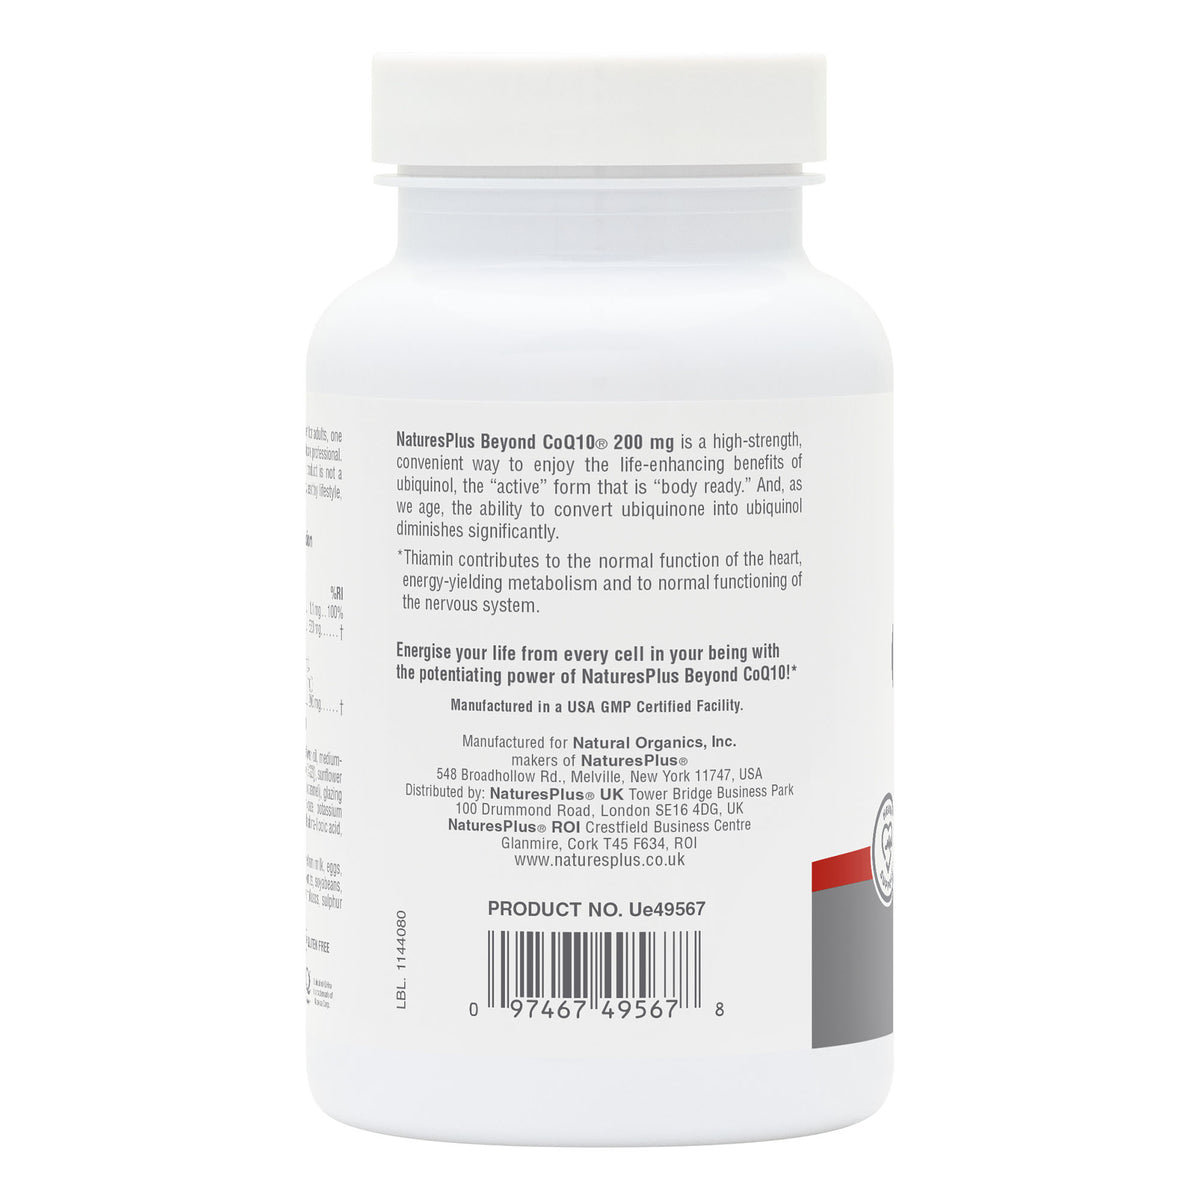 product image of Beyond CoQ10® Softgels containing 60 Count